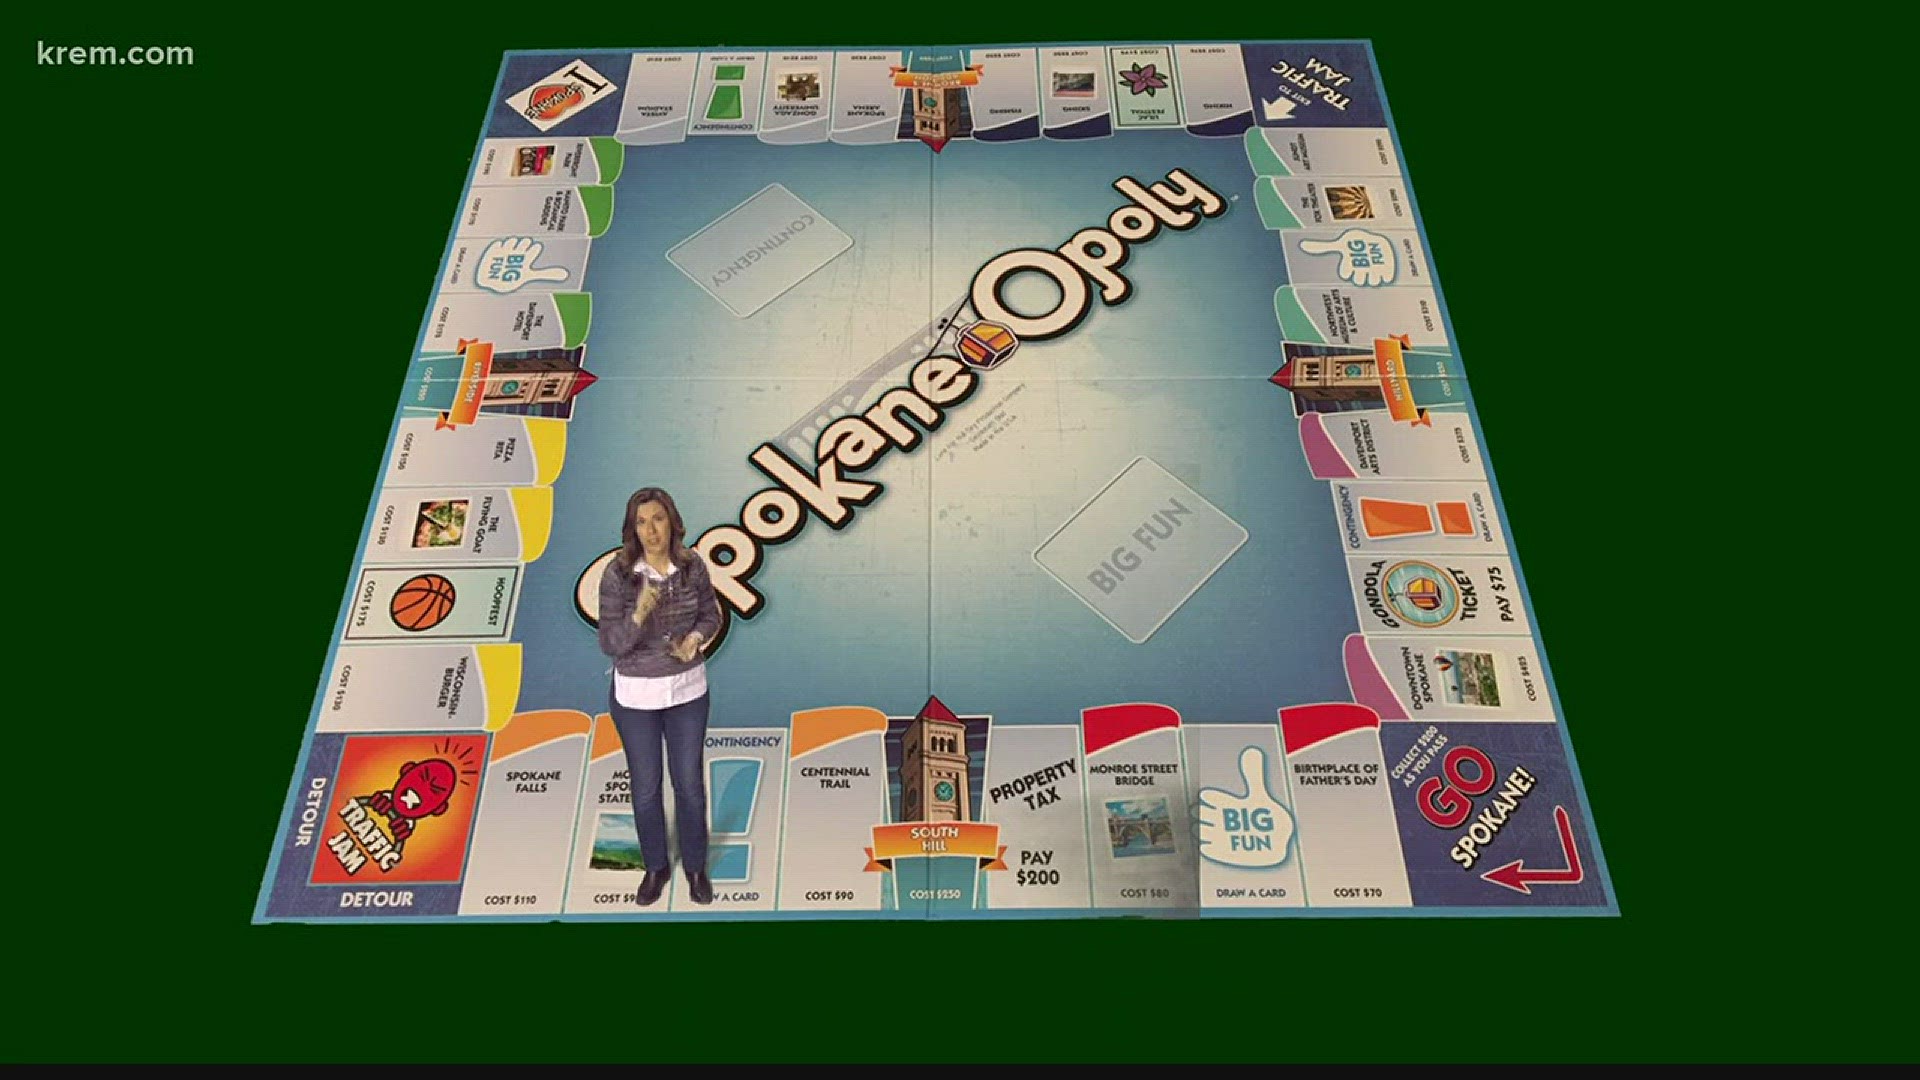 KREM 2's Amanda Roley is our resident - Sherlock Holmes. Now - this week we sent her to hunt down the board game, "Spokane-opoly." And she found it!